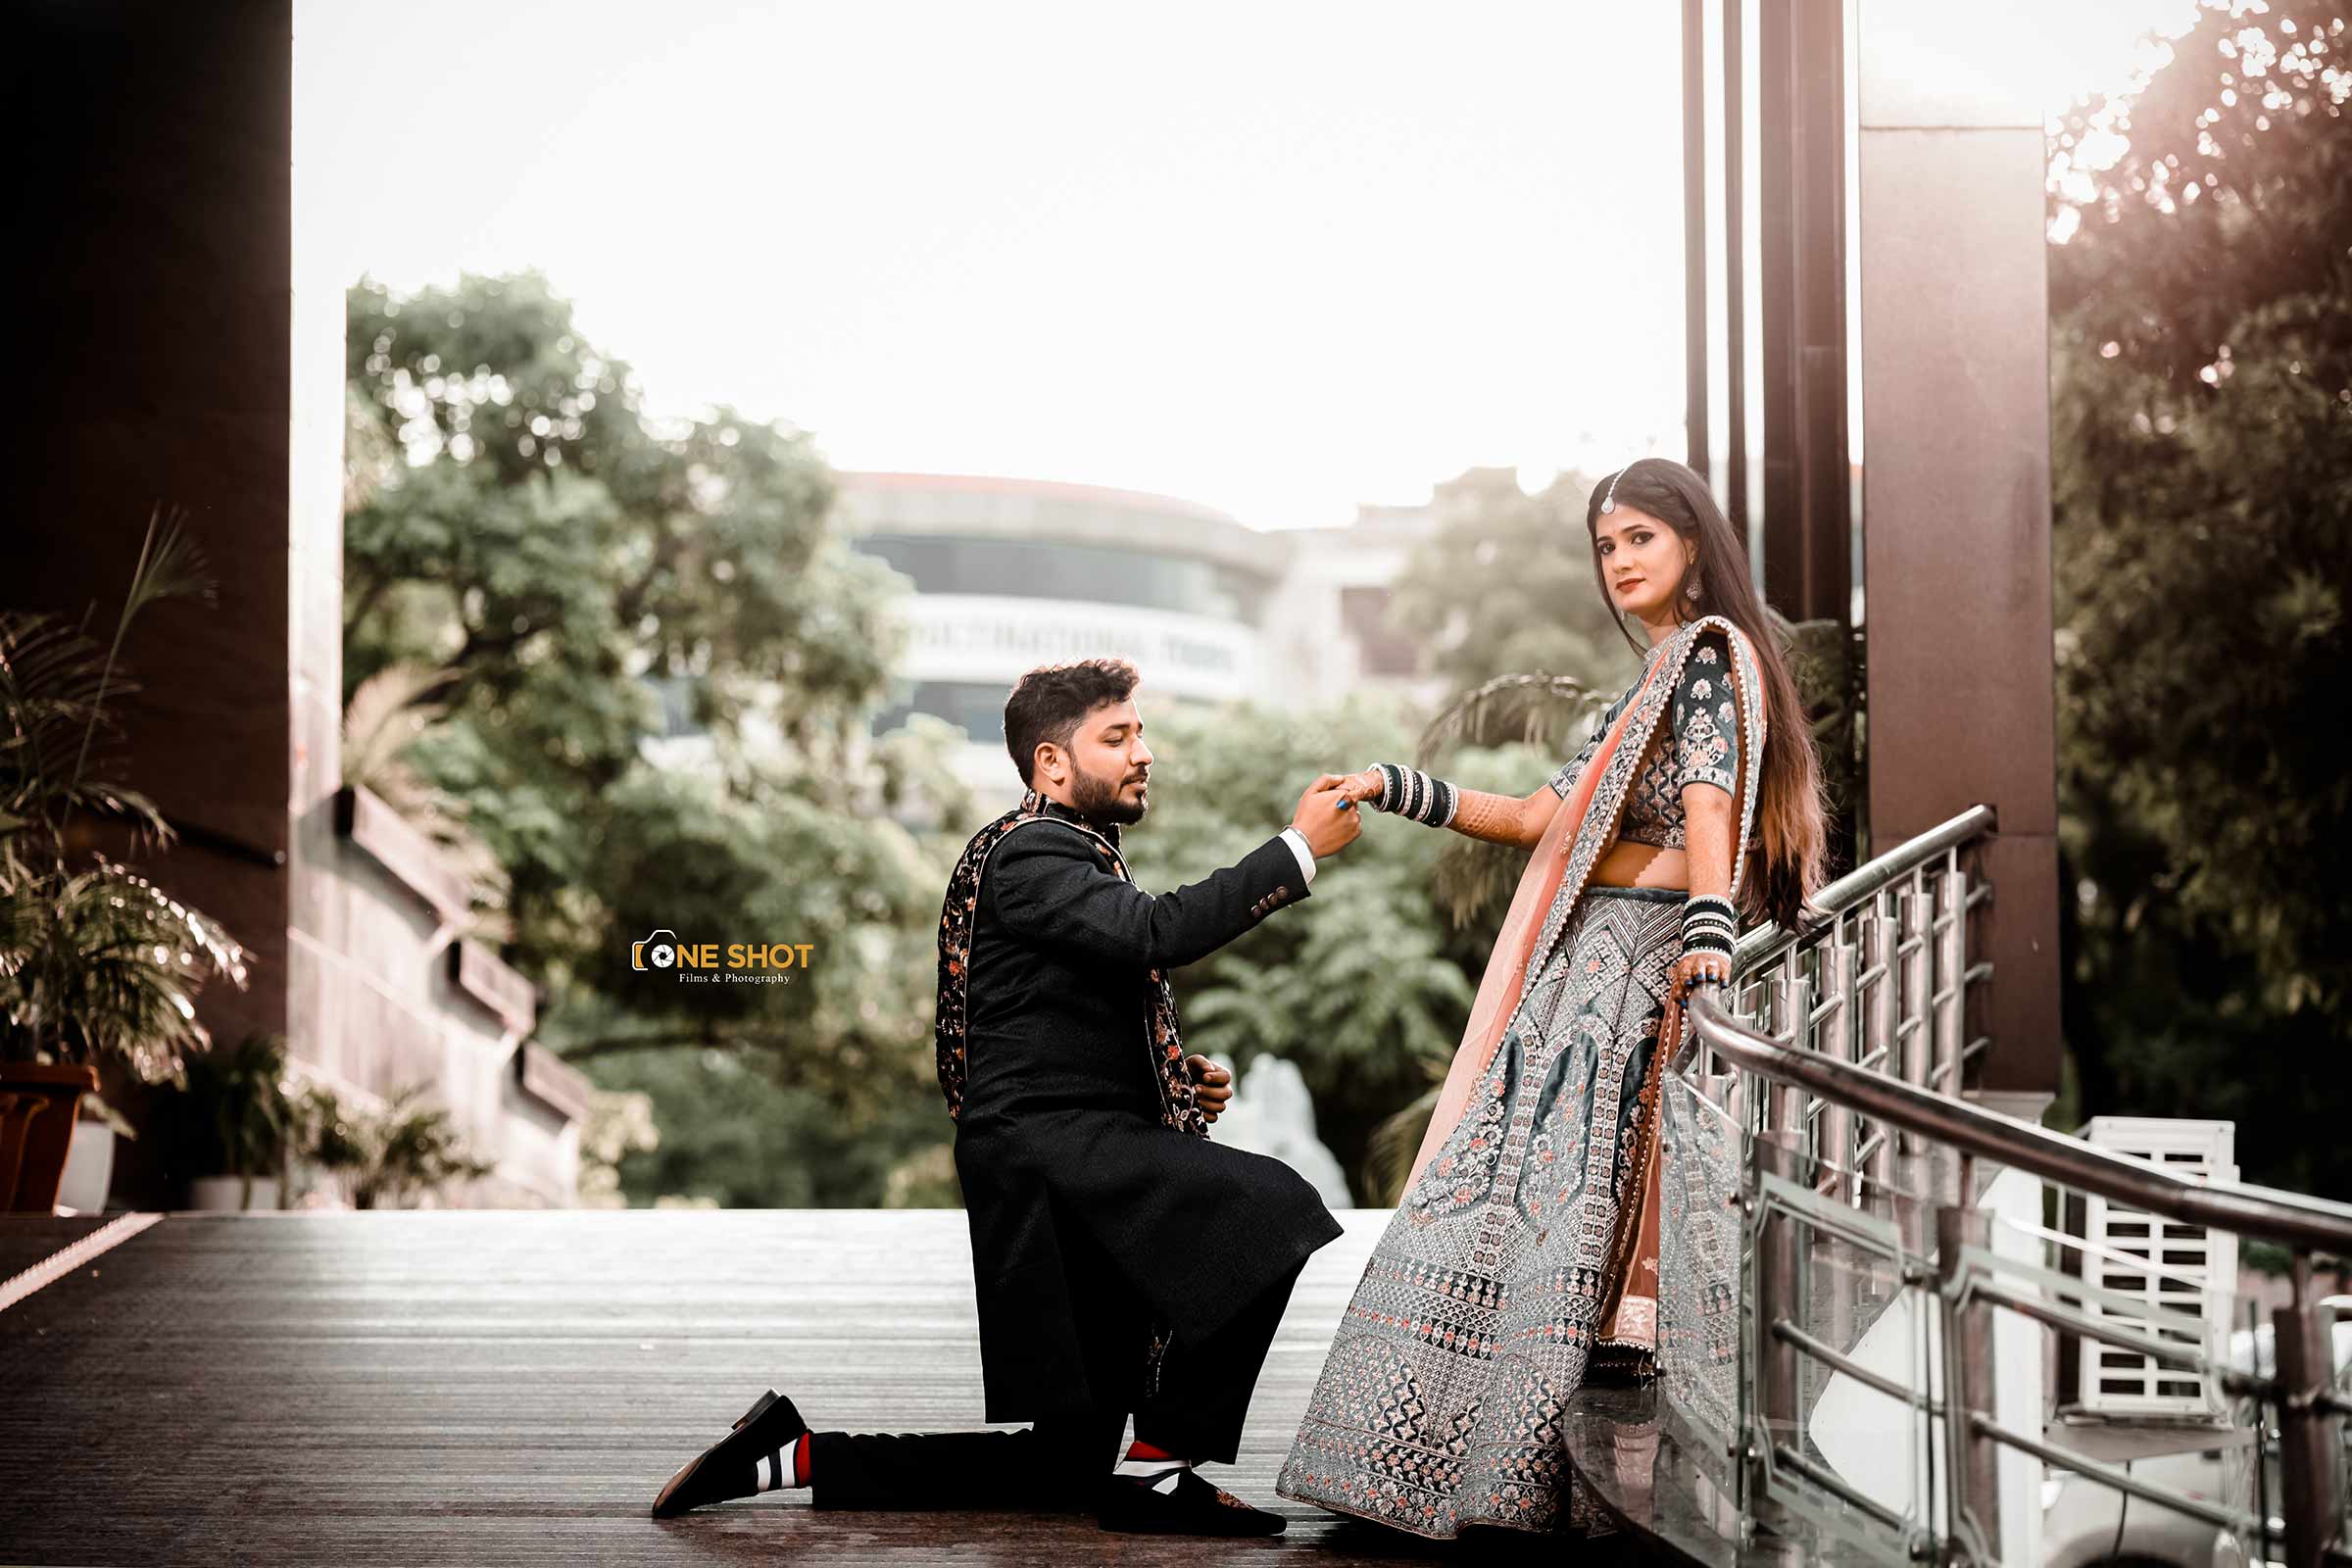 One Shot Films is a best wedding photographer in Gorakhpur. Providing services like pre wedding photography, engagement photography, video production of music videos and creative photography & videography